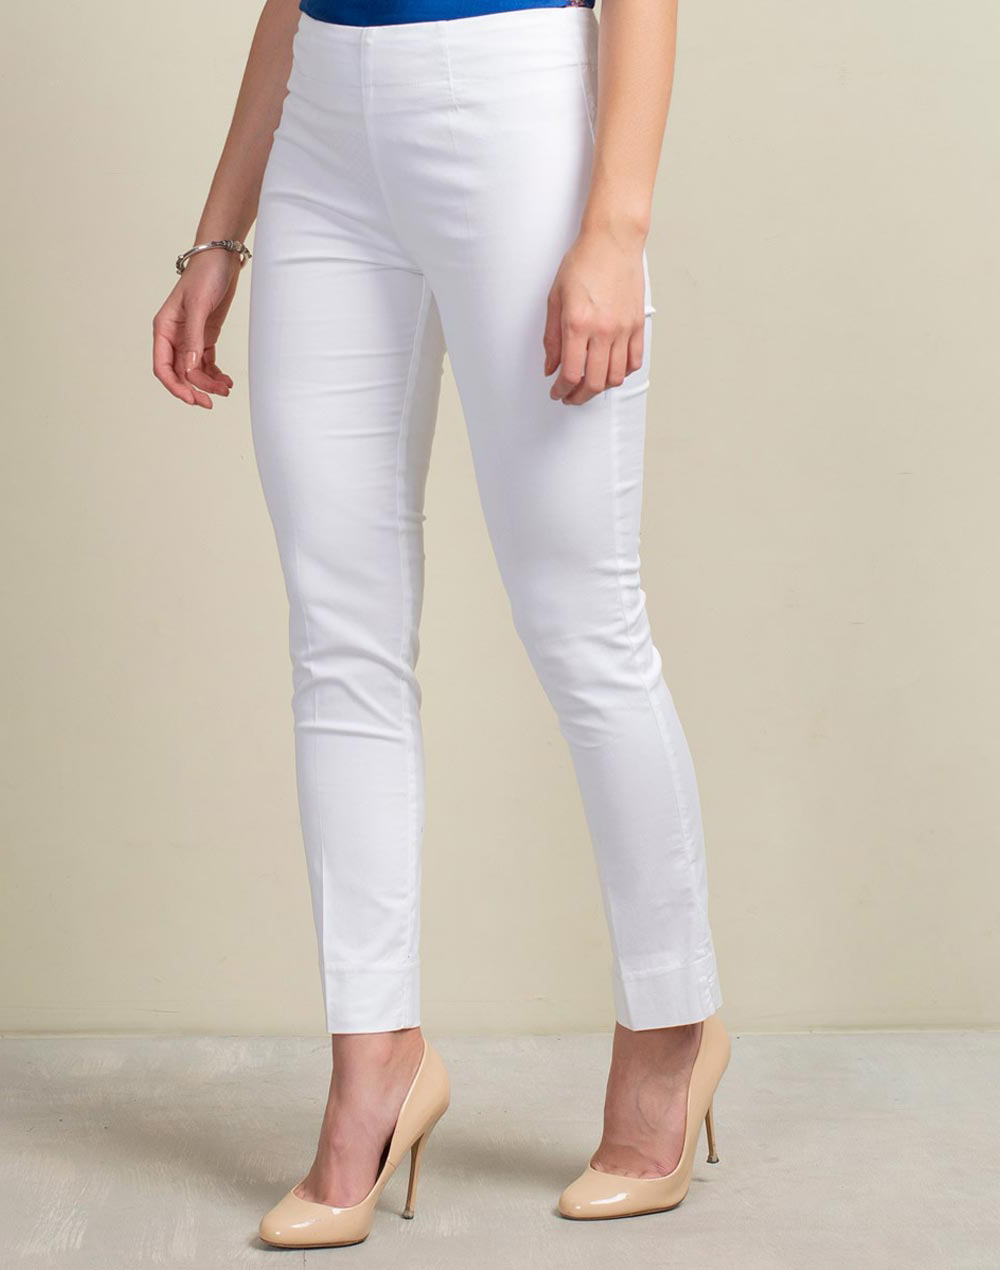 Buy Cotton Lycra Slim Fit Stretch Pant for Women Online at Fabindia